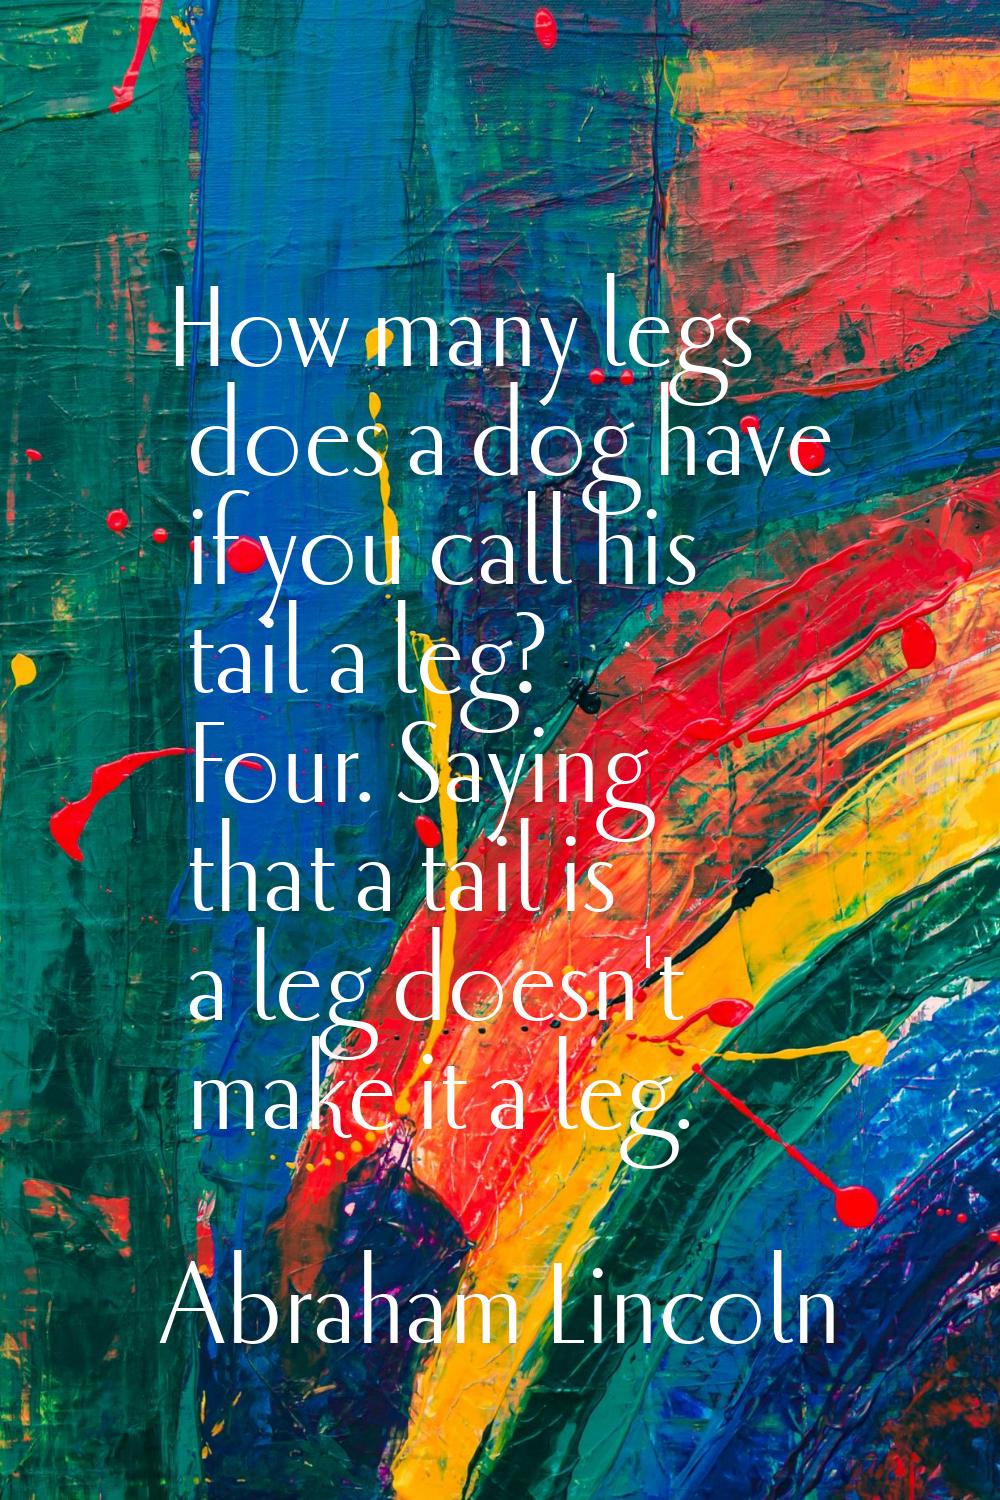 How many legs does a dog have if you call his tail a leg? Four. Saying that a tail is a leg doesn't